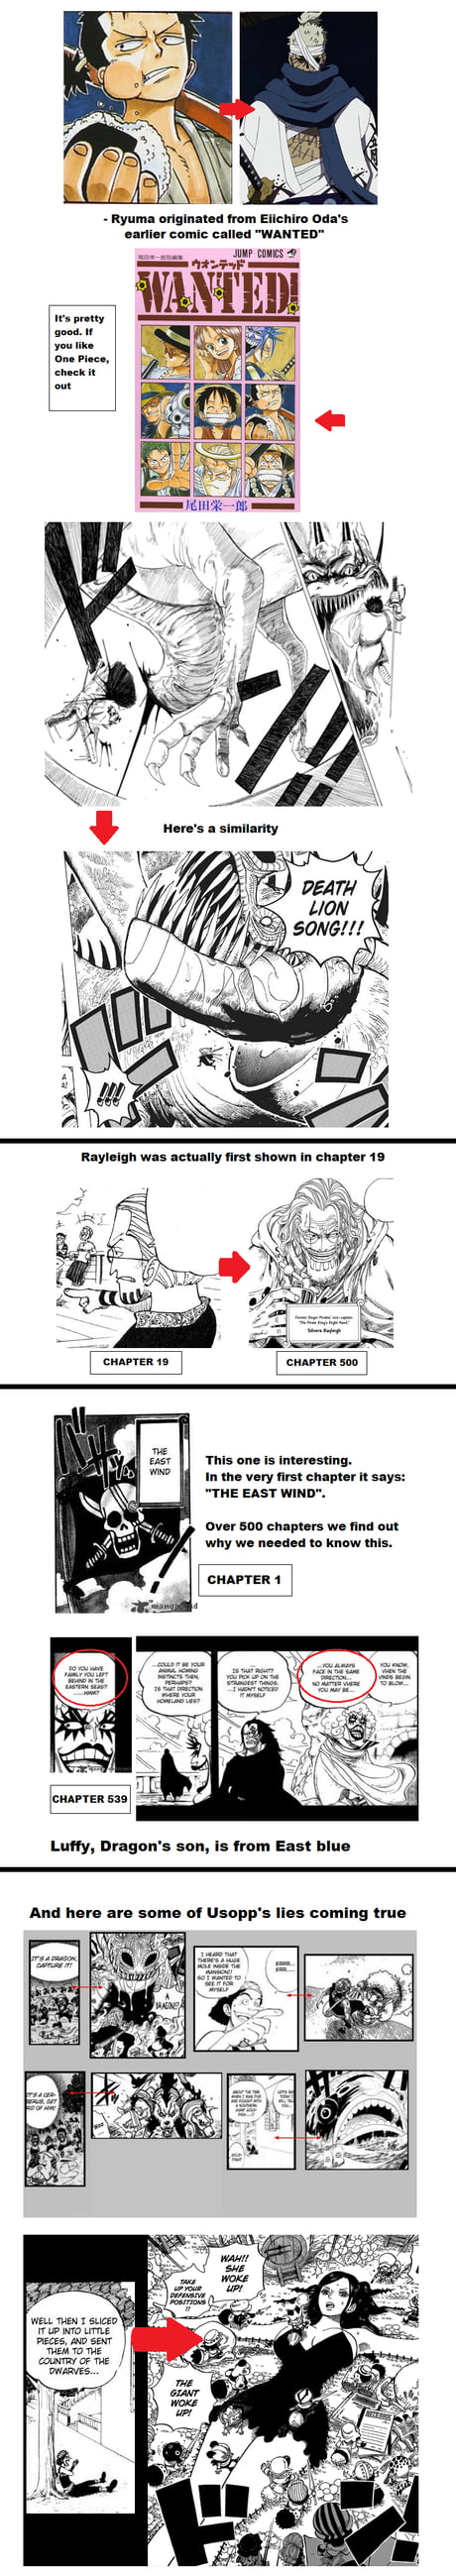 Here S Some Random One Piece Facts I Put Together Part 1 I Think 9gag